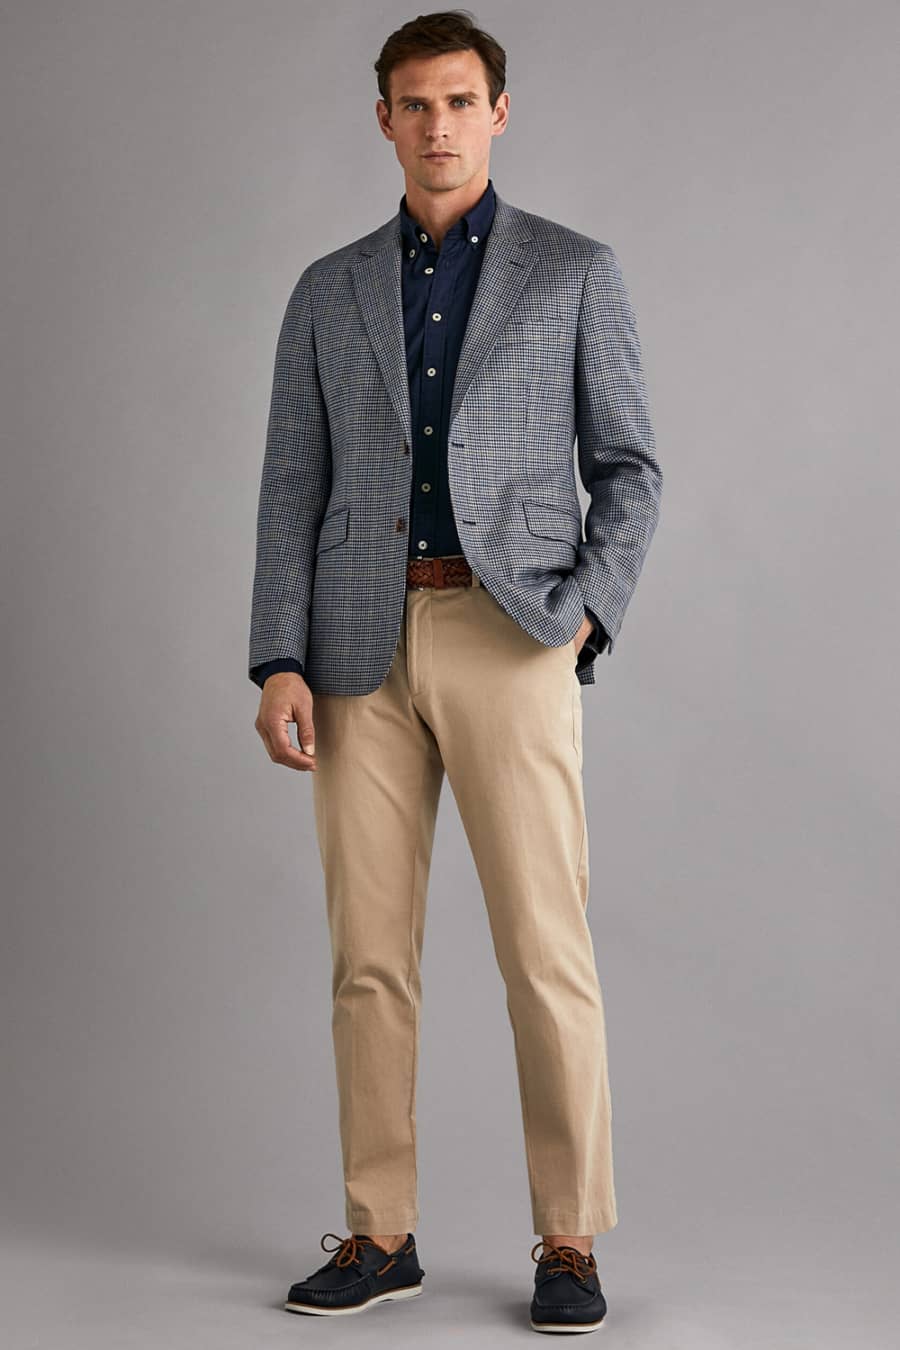 Men's khaki pants, navy Oxford shirt, sports coat and boat shoes outfit